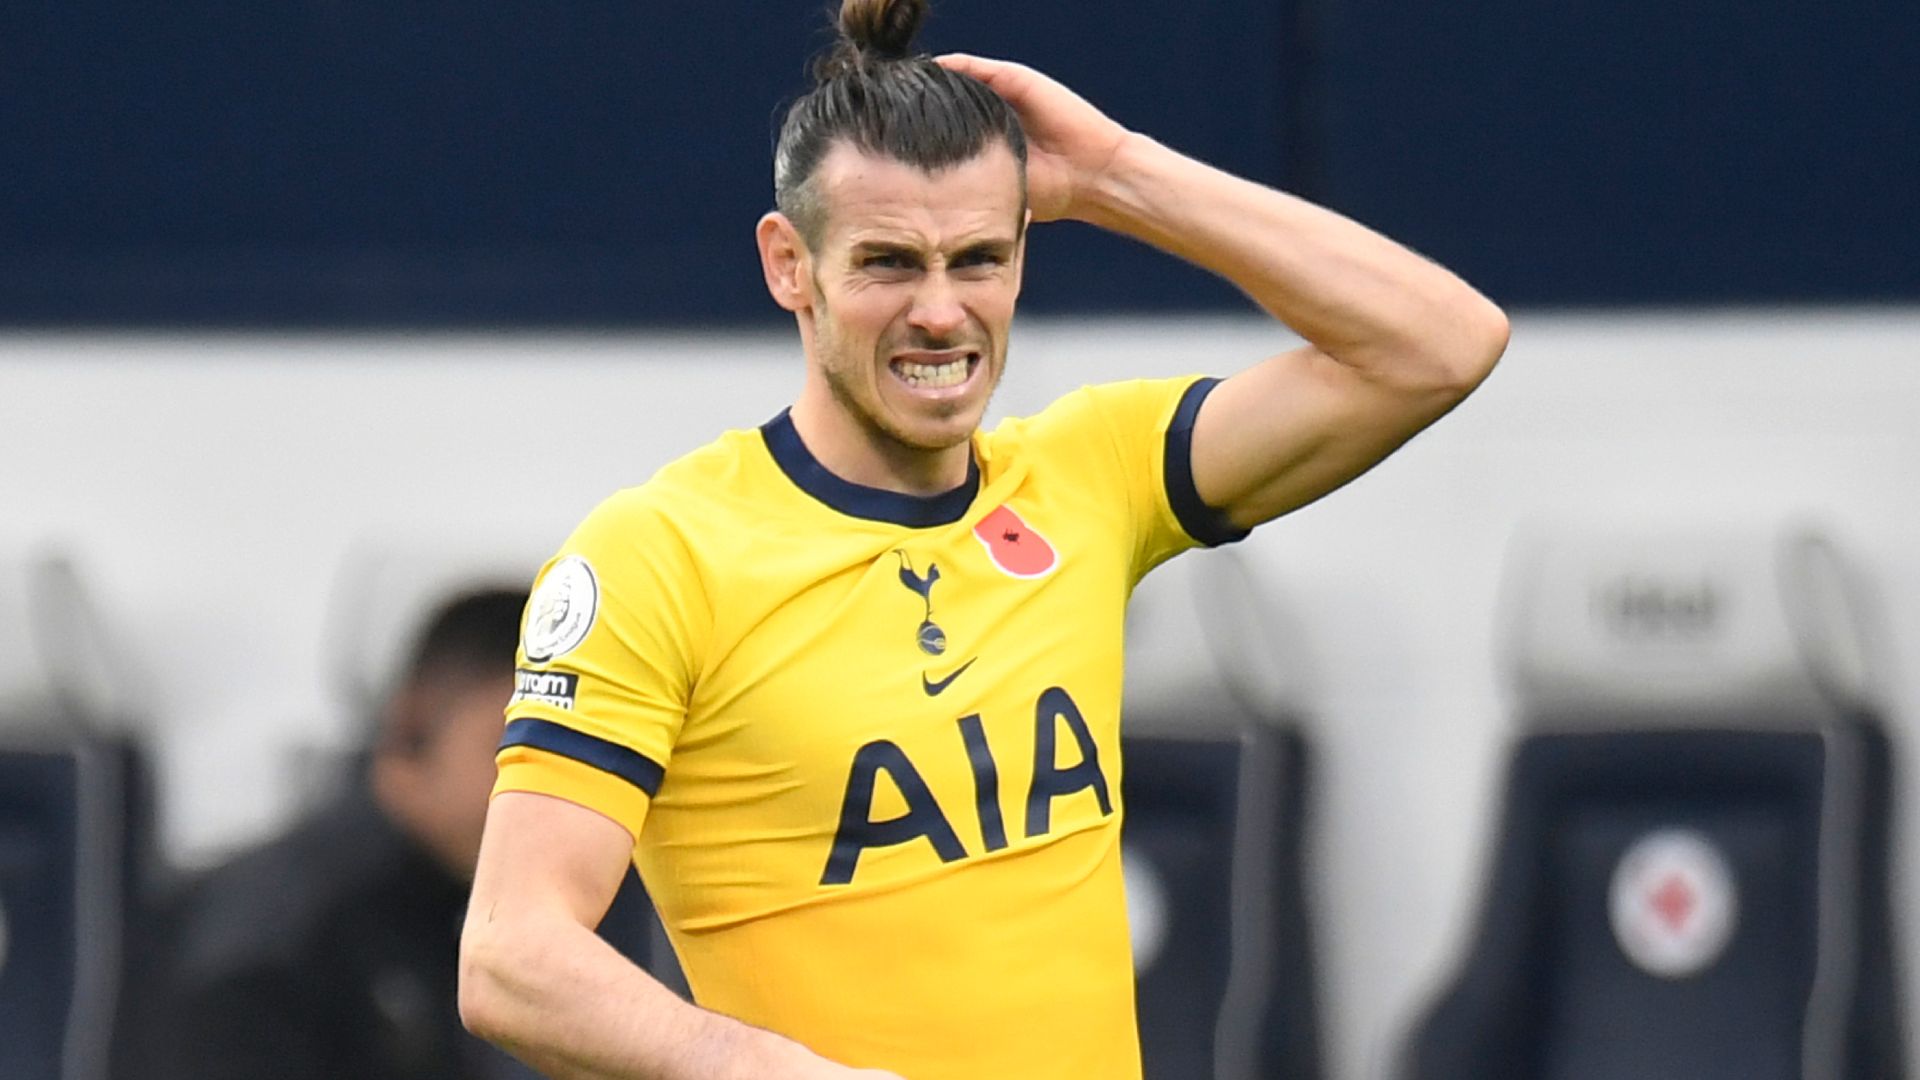 Transfer Talk: What does the future hold for Bale?